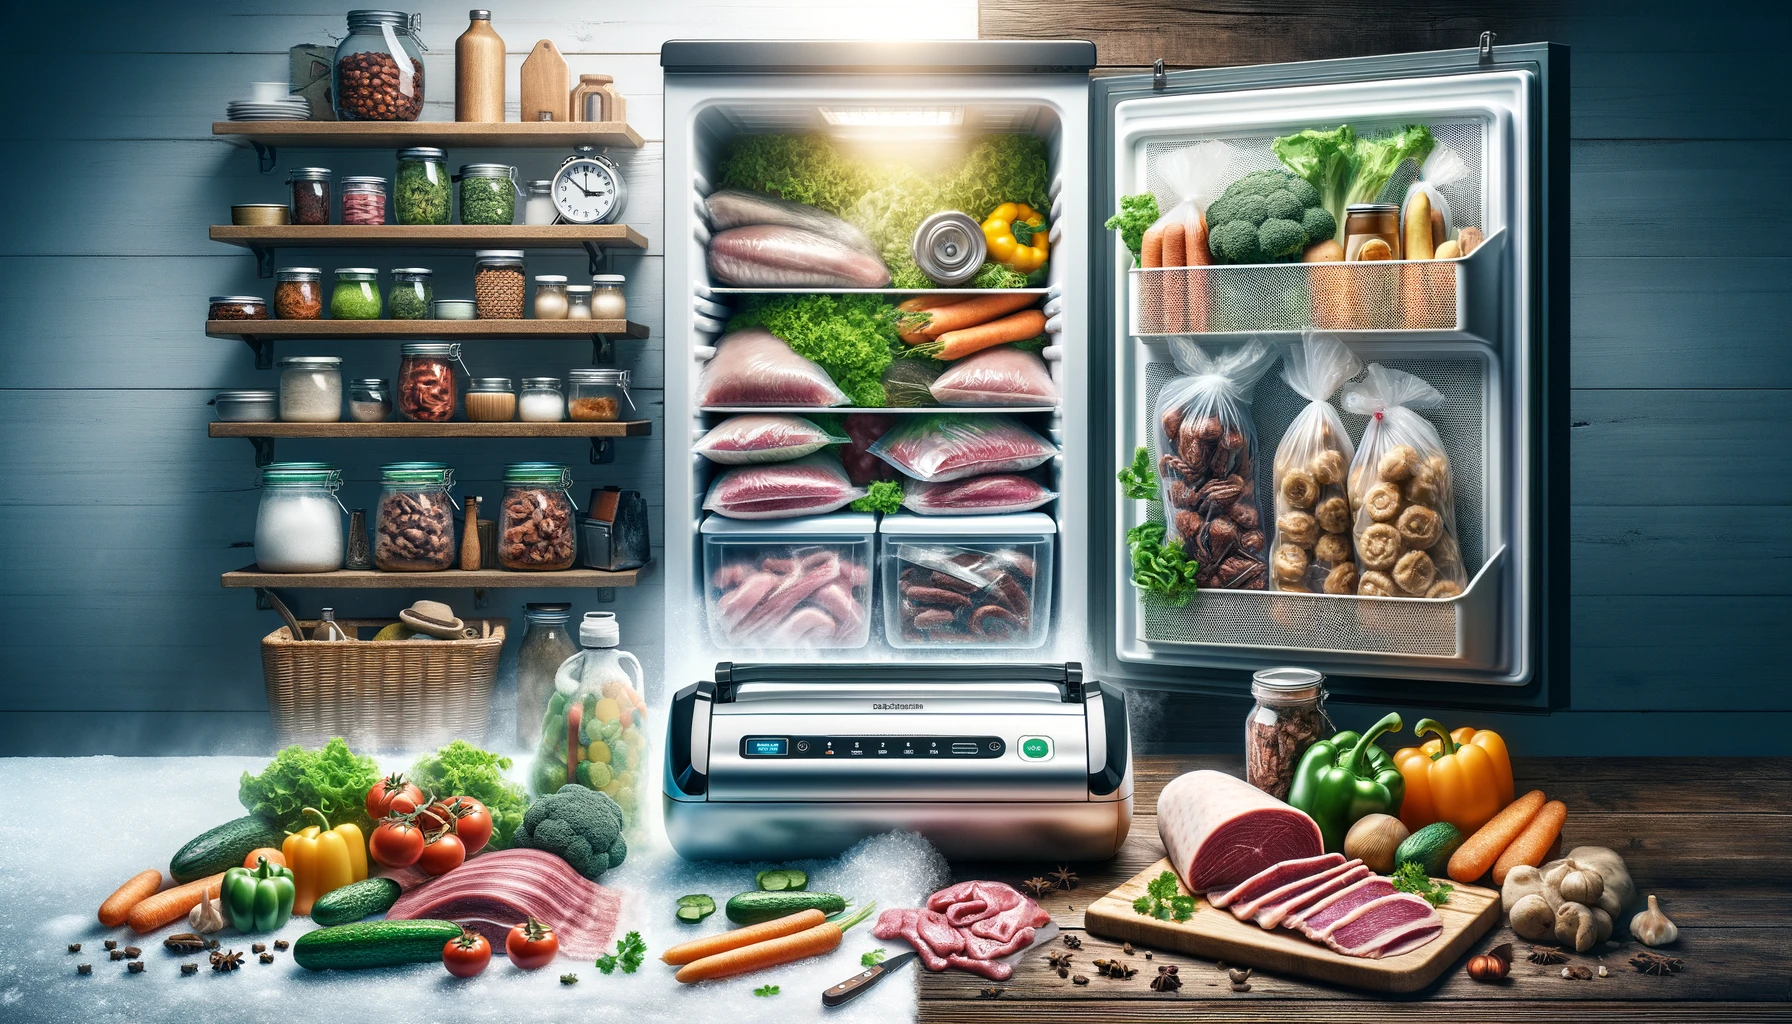 Prepper in kitchen using a vacuum sealer to prevent freezer burn, showcasing before and after examples of foods like meats and vegetables, illustrating the vacuum sealer's effectiveness in preserving food quality against the dry, discolored effects of freezer burn